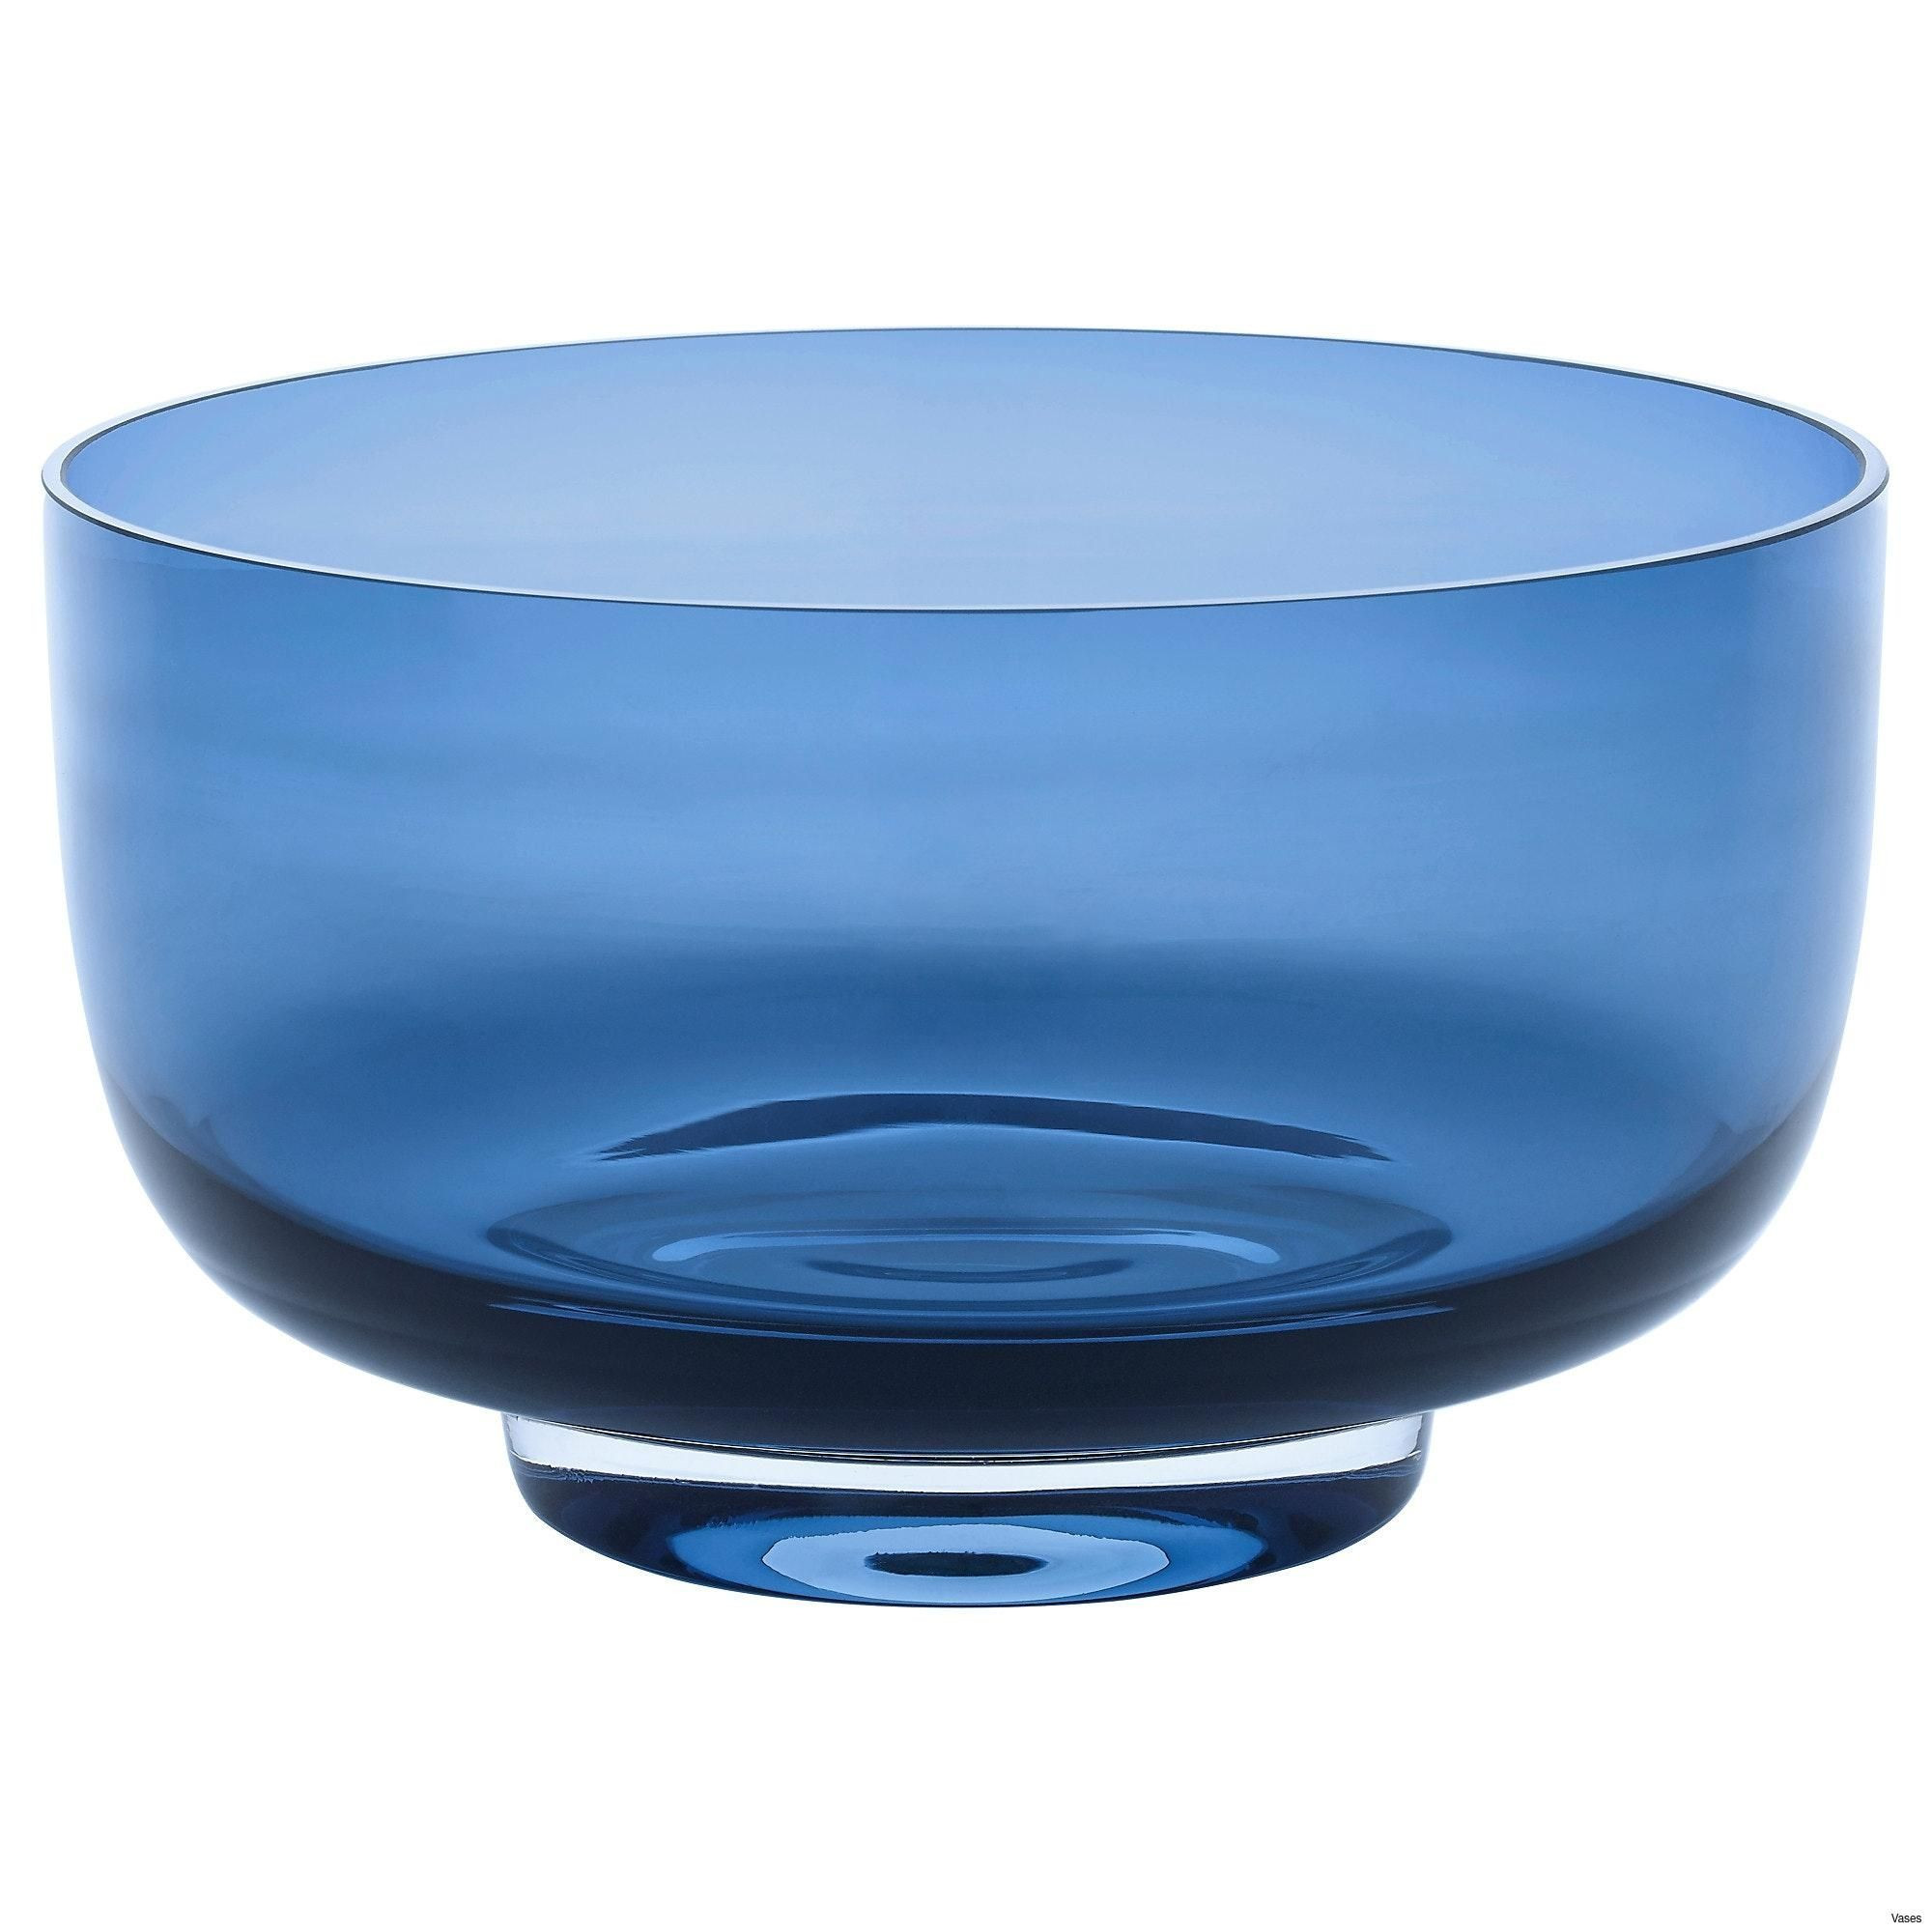 22 Unique Lenox Lead Crystal Vase 2024 free download lenox lead crystal vase of 23 blue crystal vase the weekly world intended for decorative glass bowl new living room ikea vases awesome pe s5h